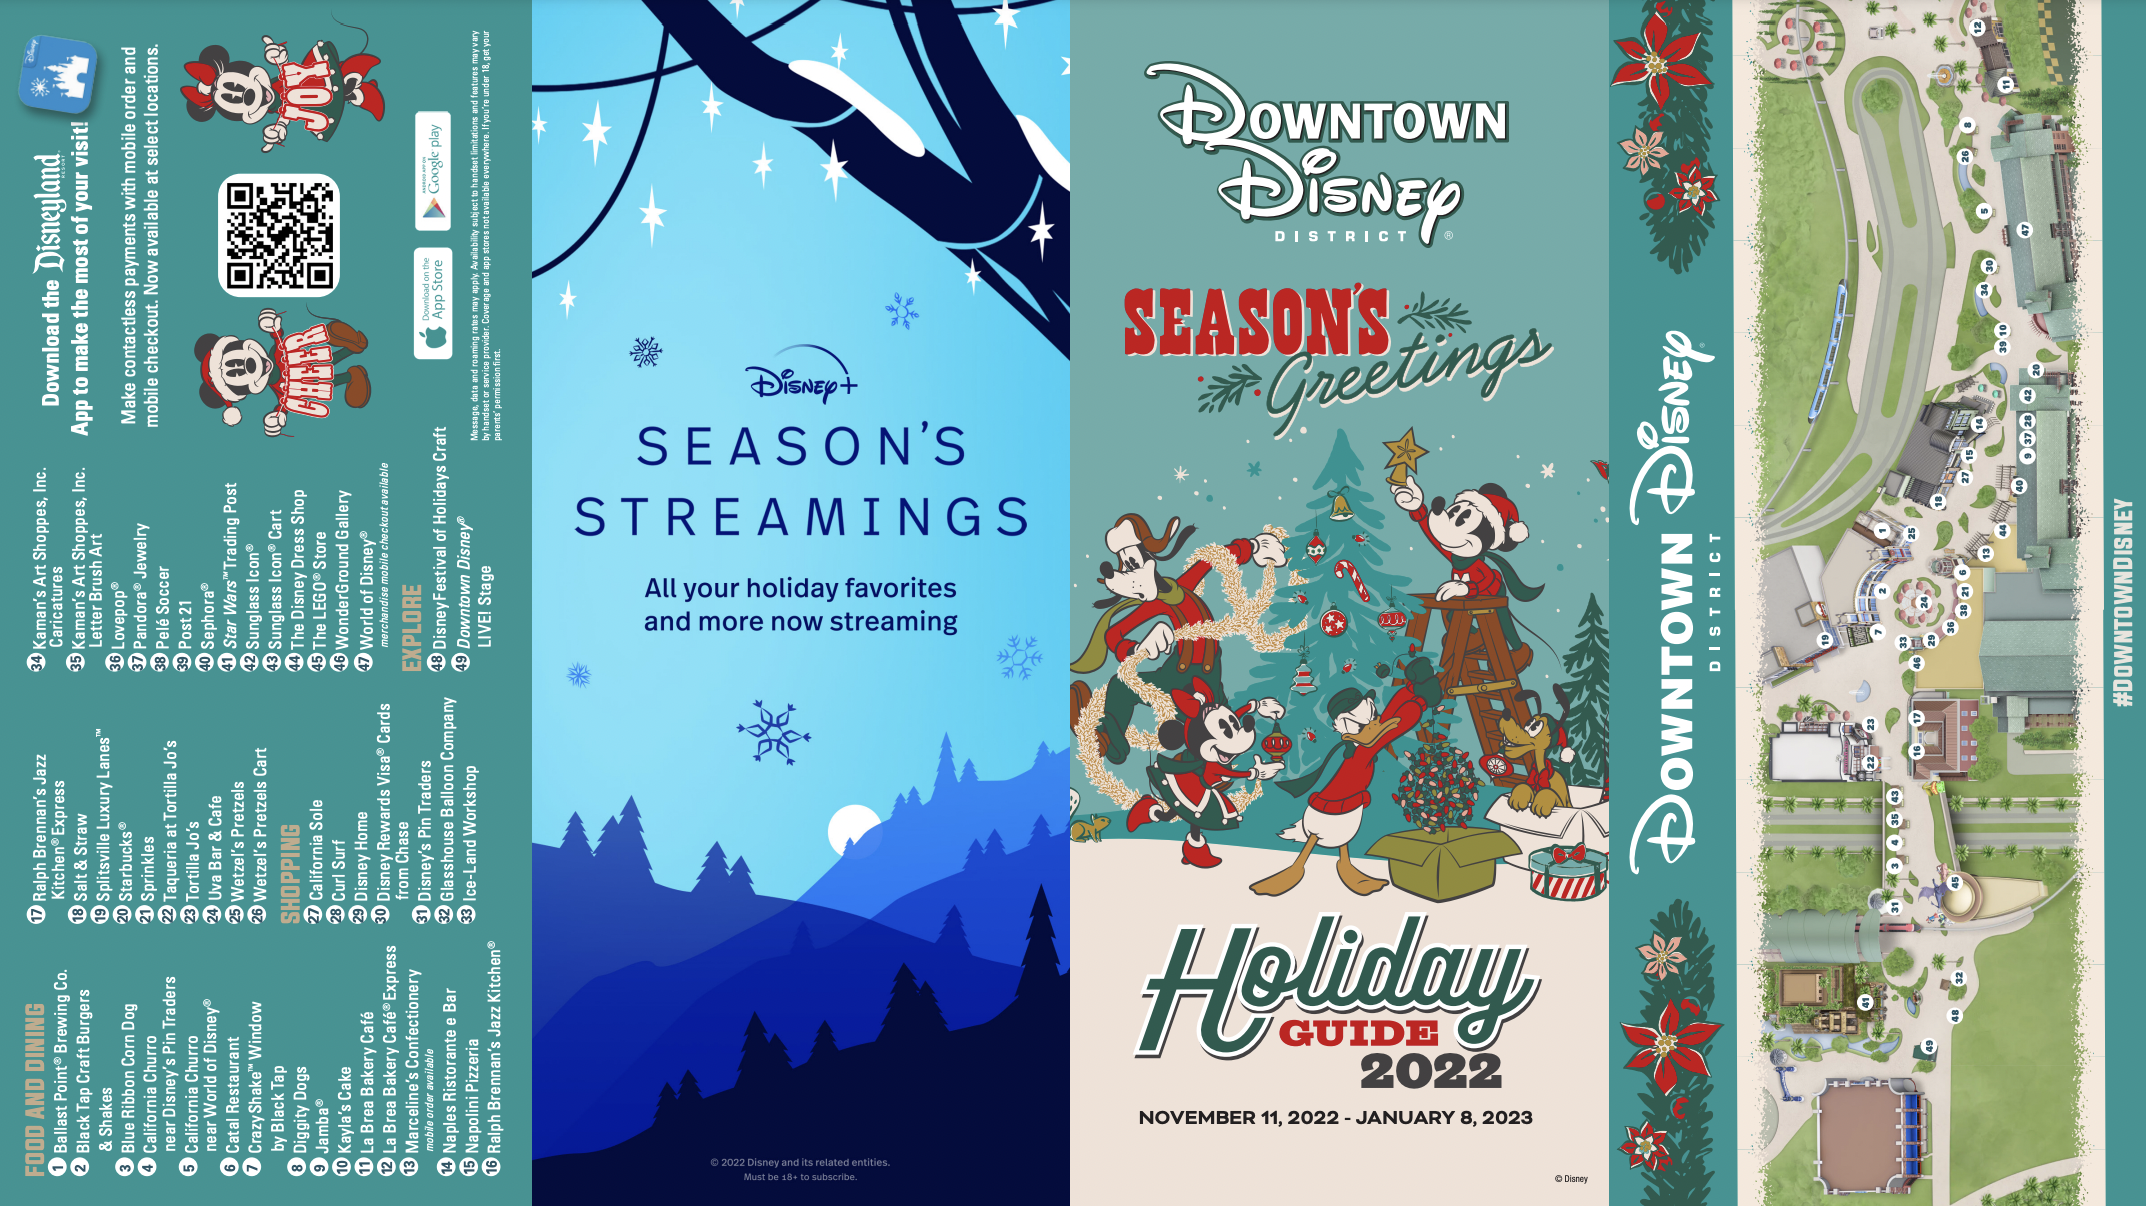 downtown disney 2022 holiday guide